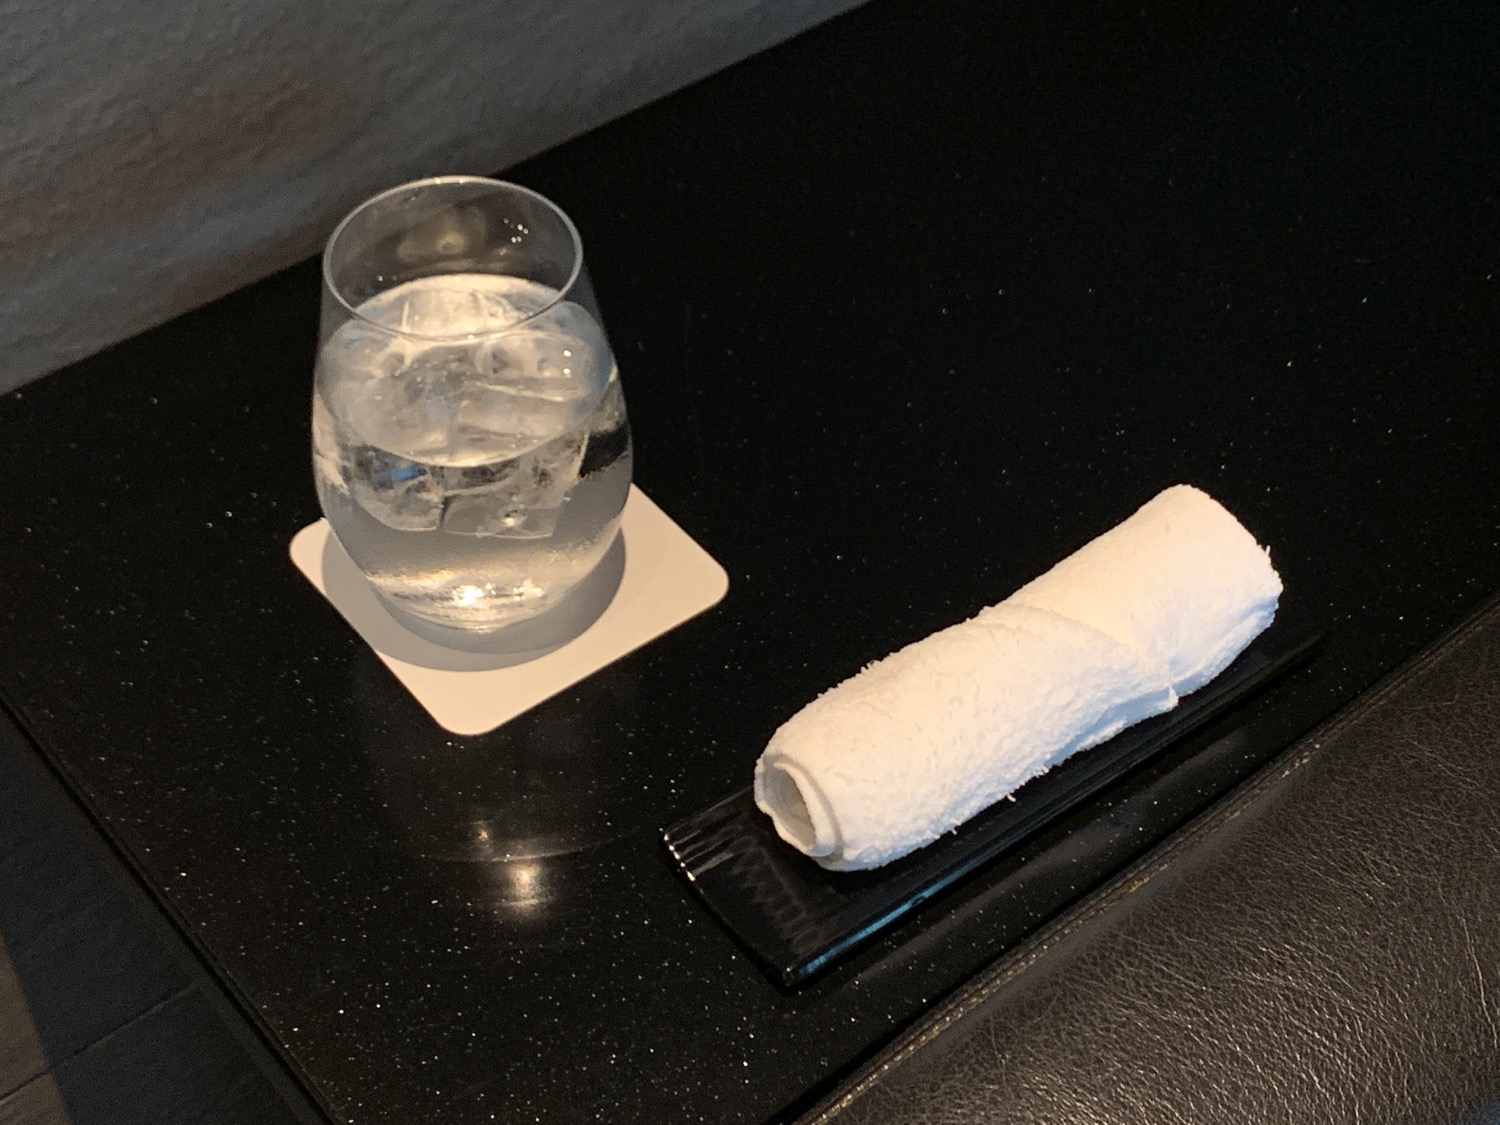 a glass of water and a rolled up towel on a black surface